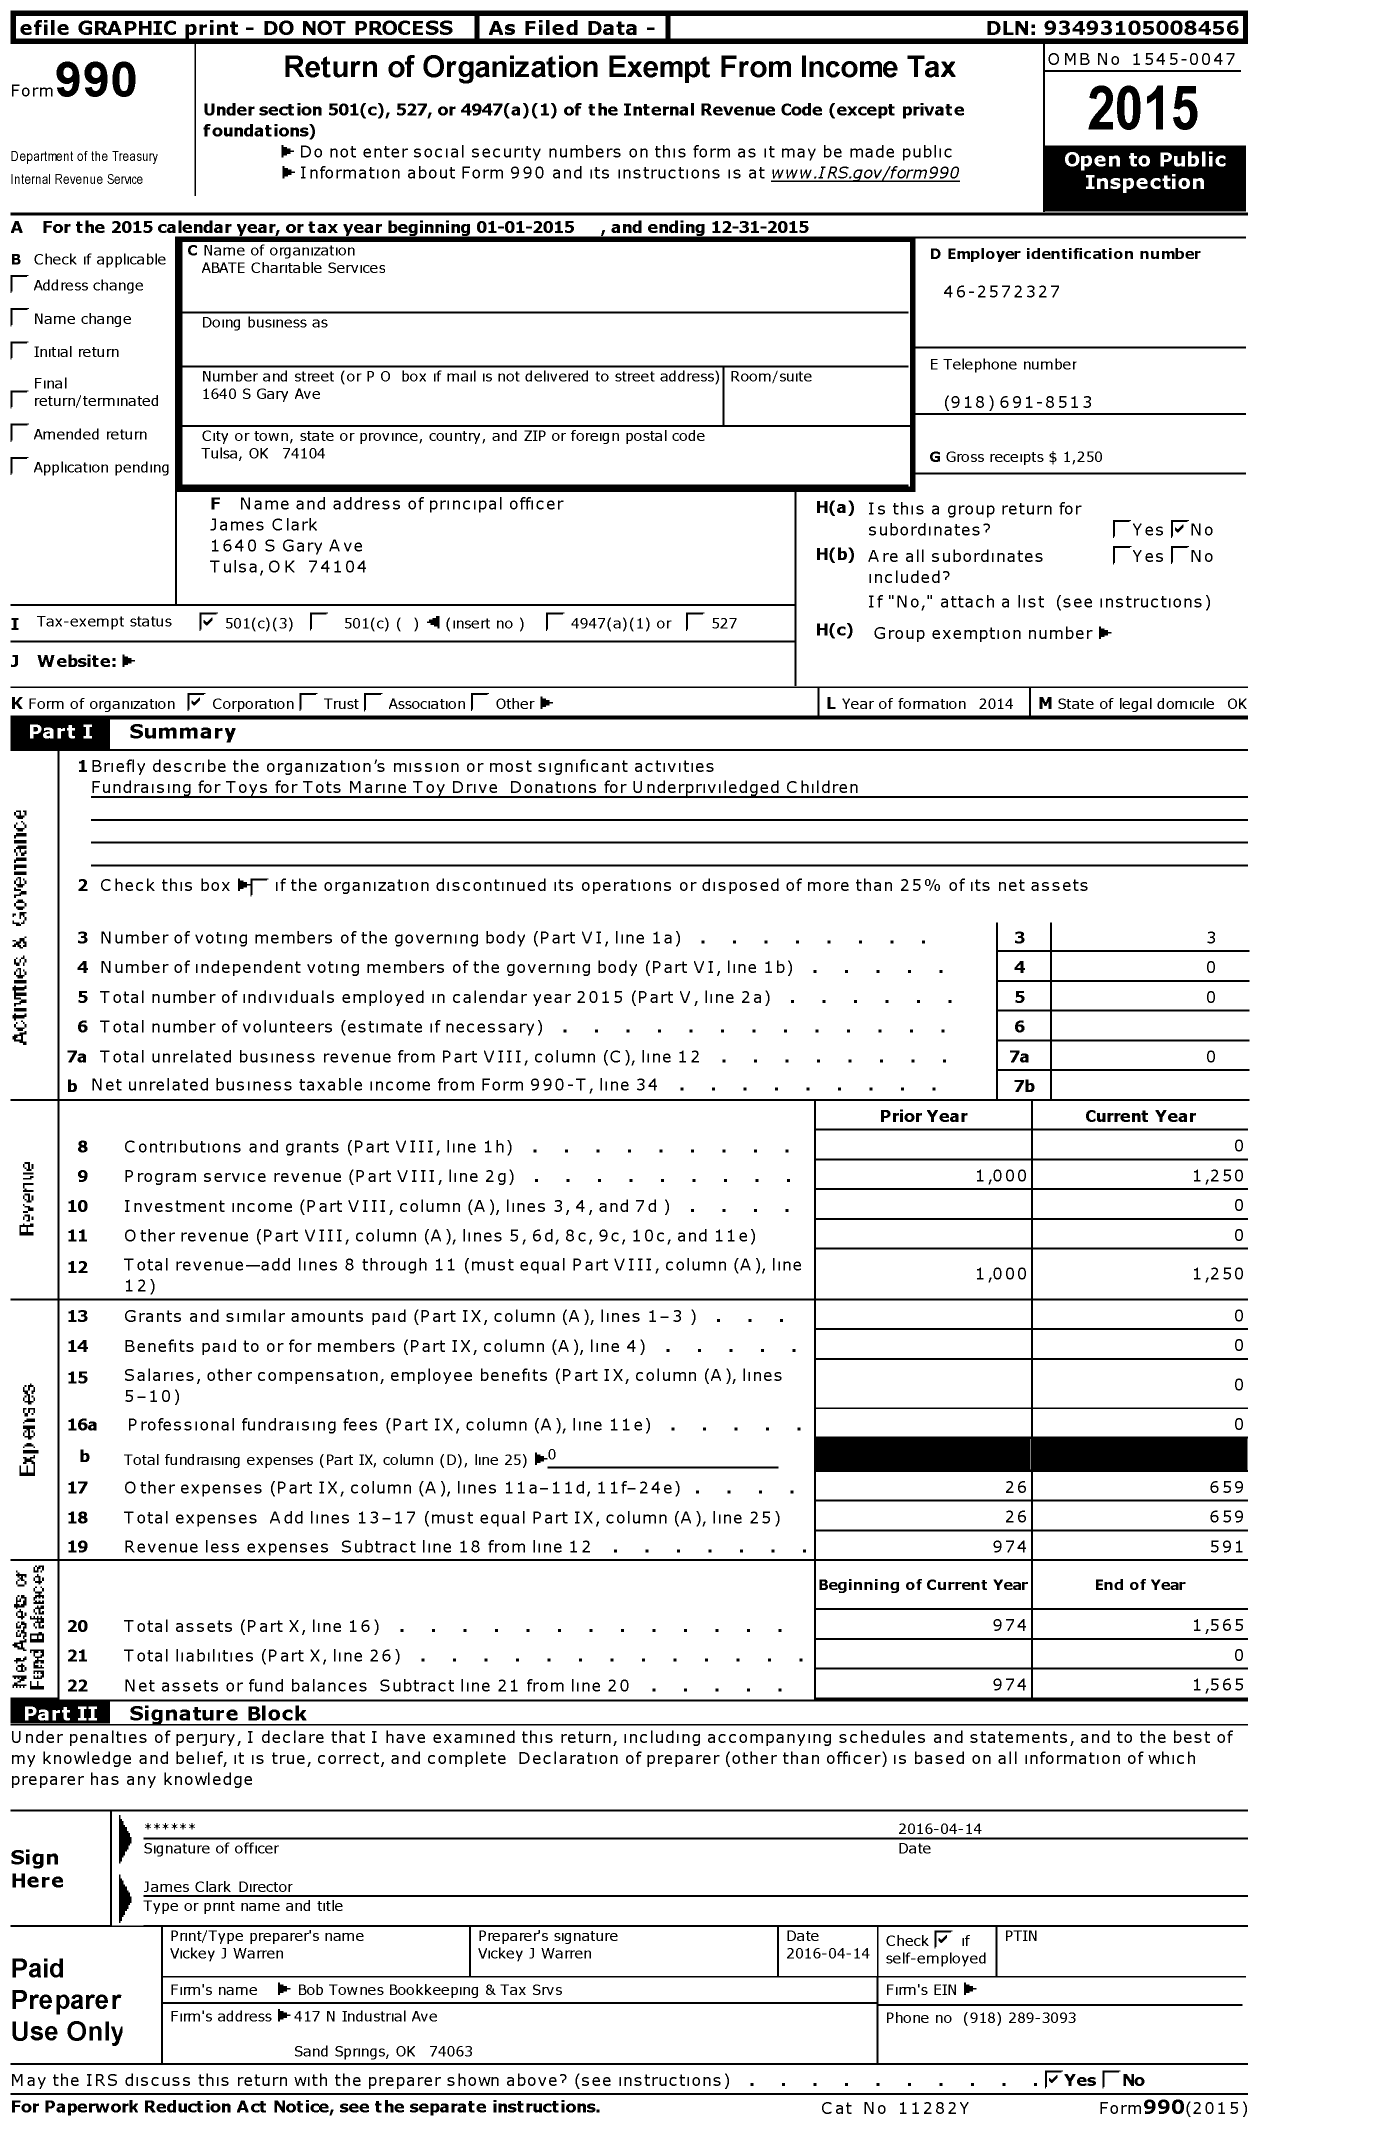 Image of first page of 2015 Form 990 for ABATE Charitable Services